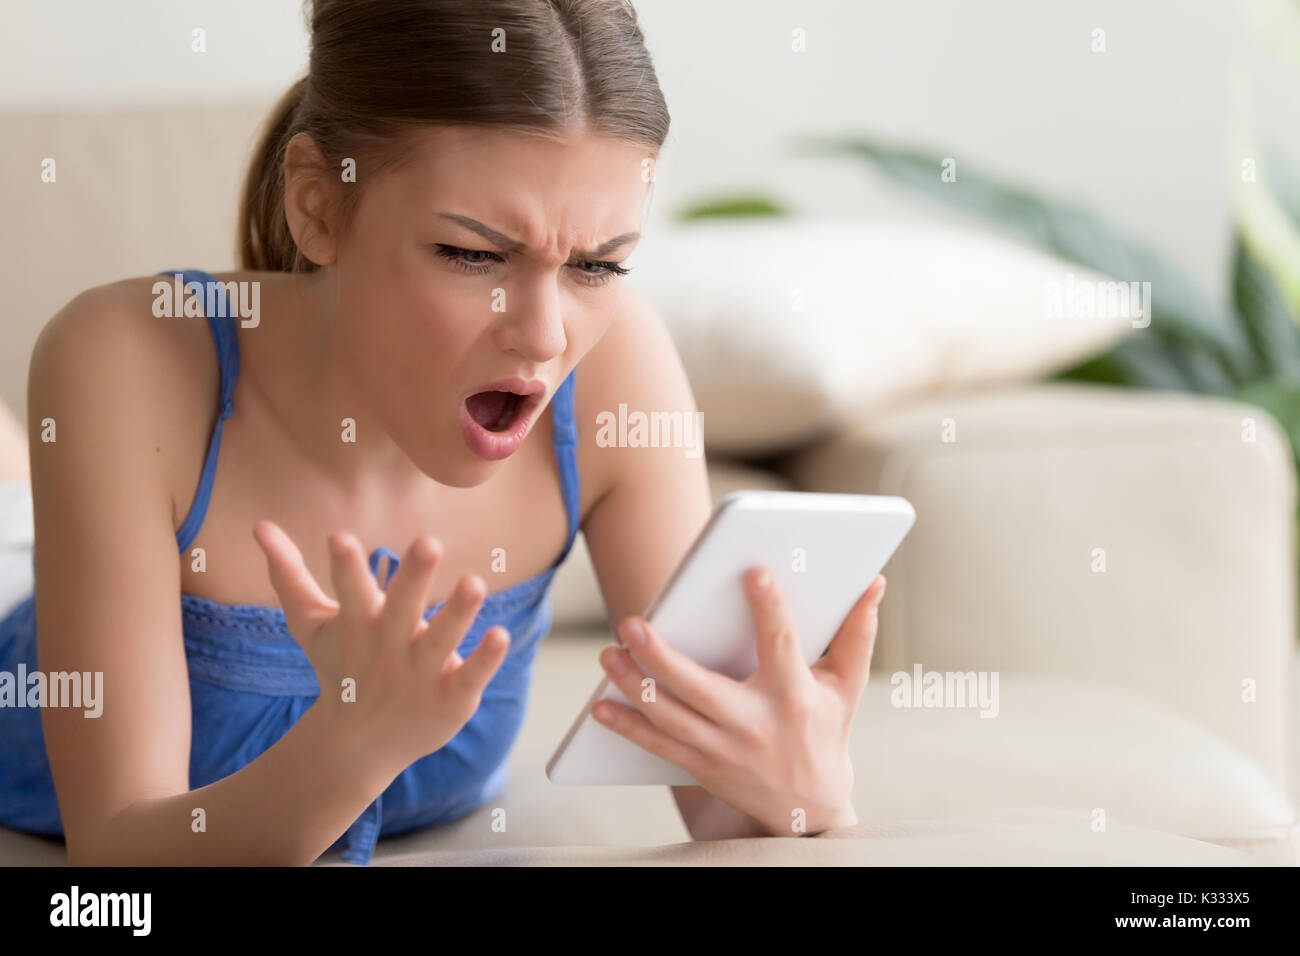 Shocked young woman using digital tablet at home Stock Photo